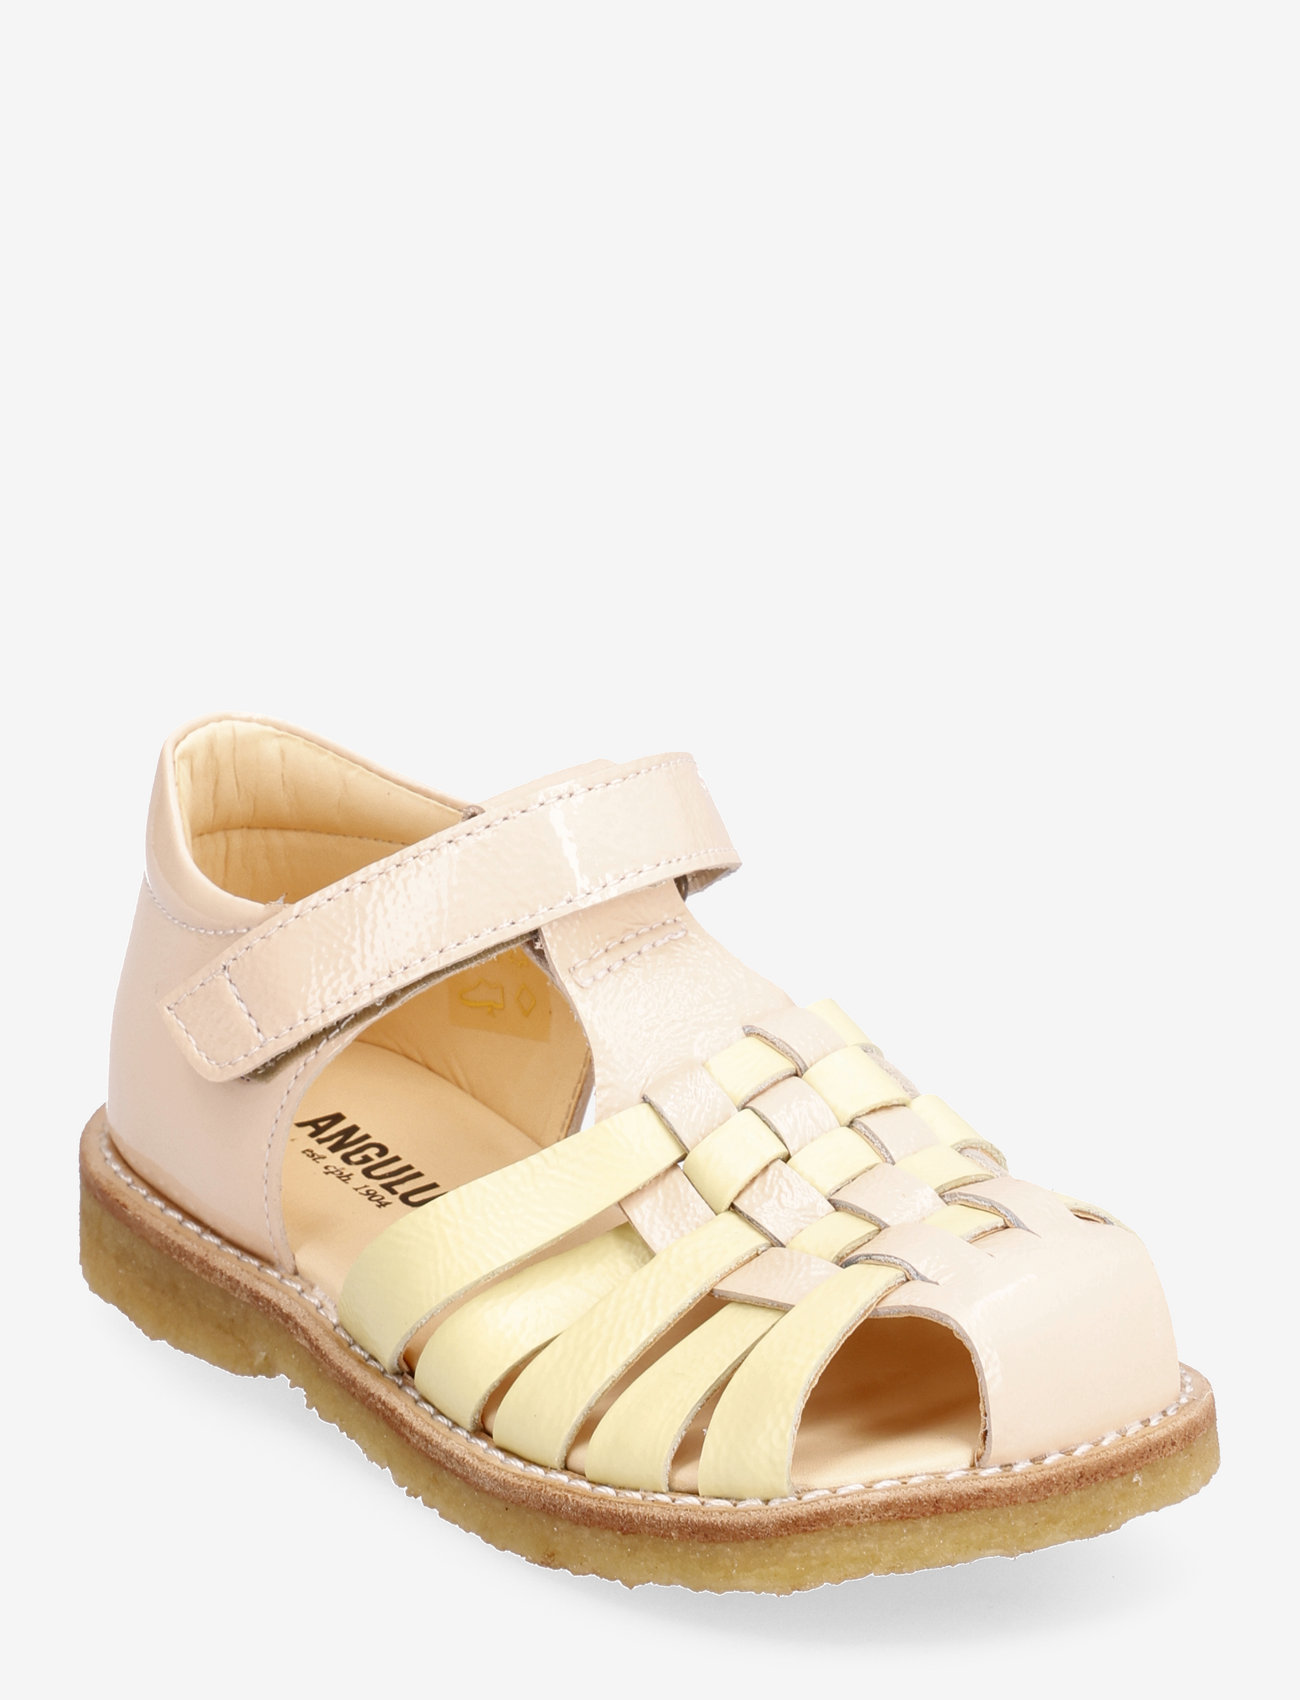 ANGULUS - Sandals - flat - closed toe - - sommarfynd - 1304/1320 peach/l.yellow - 0